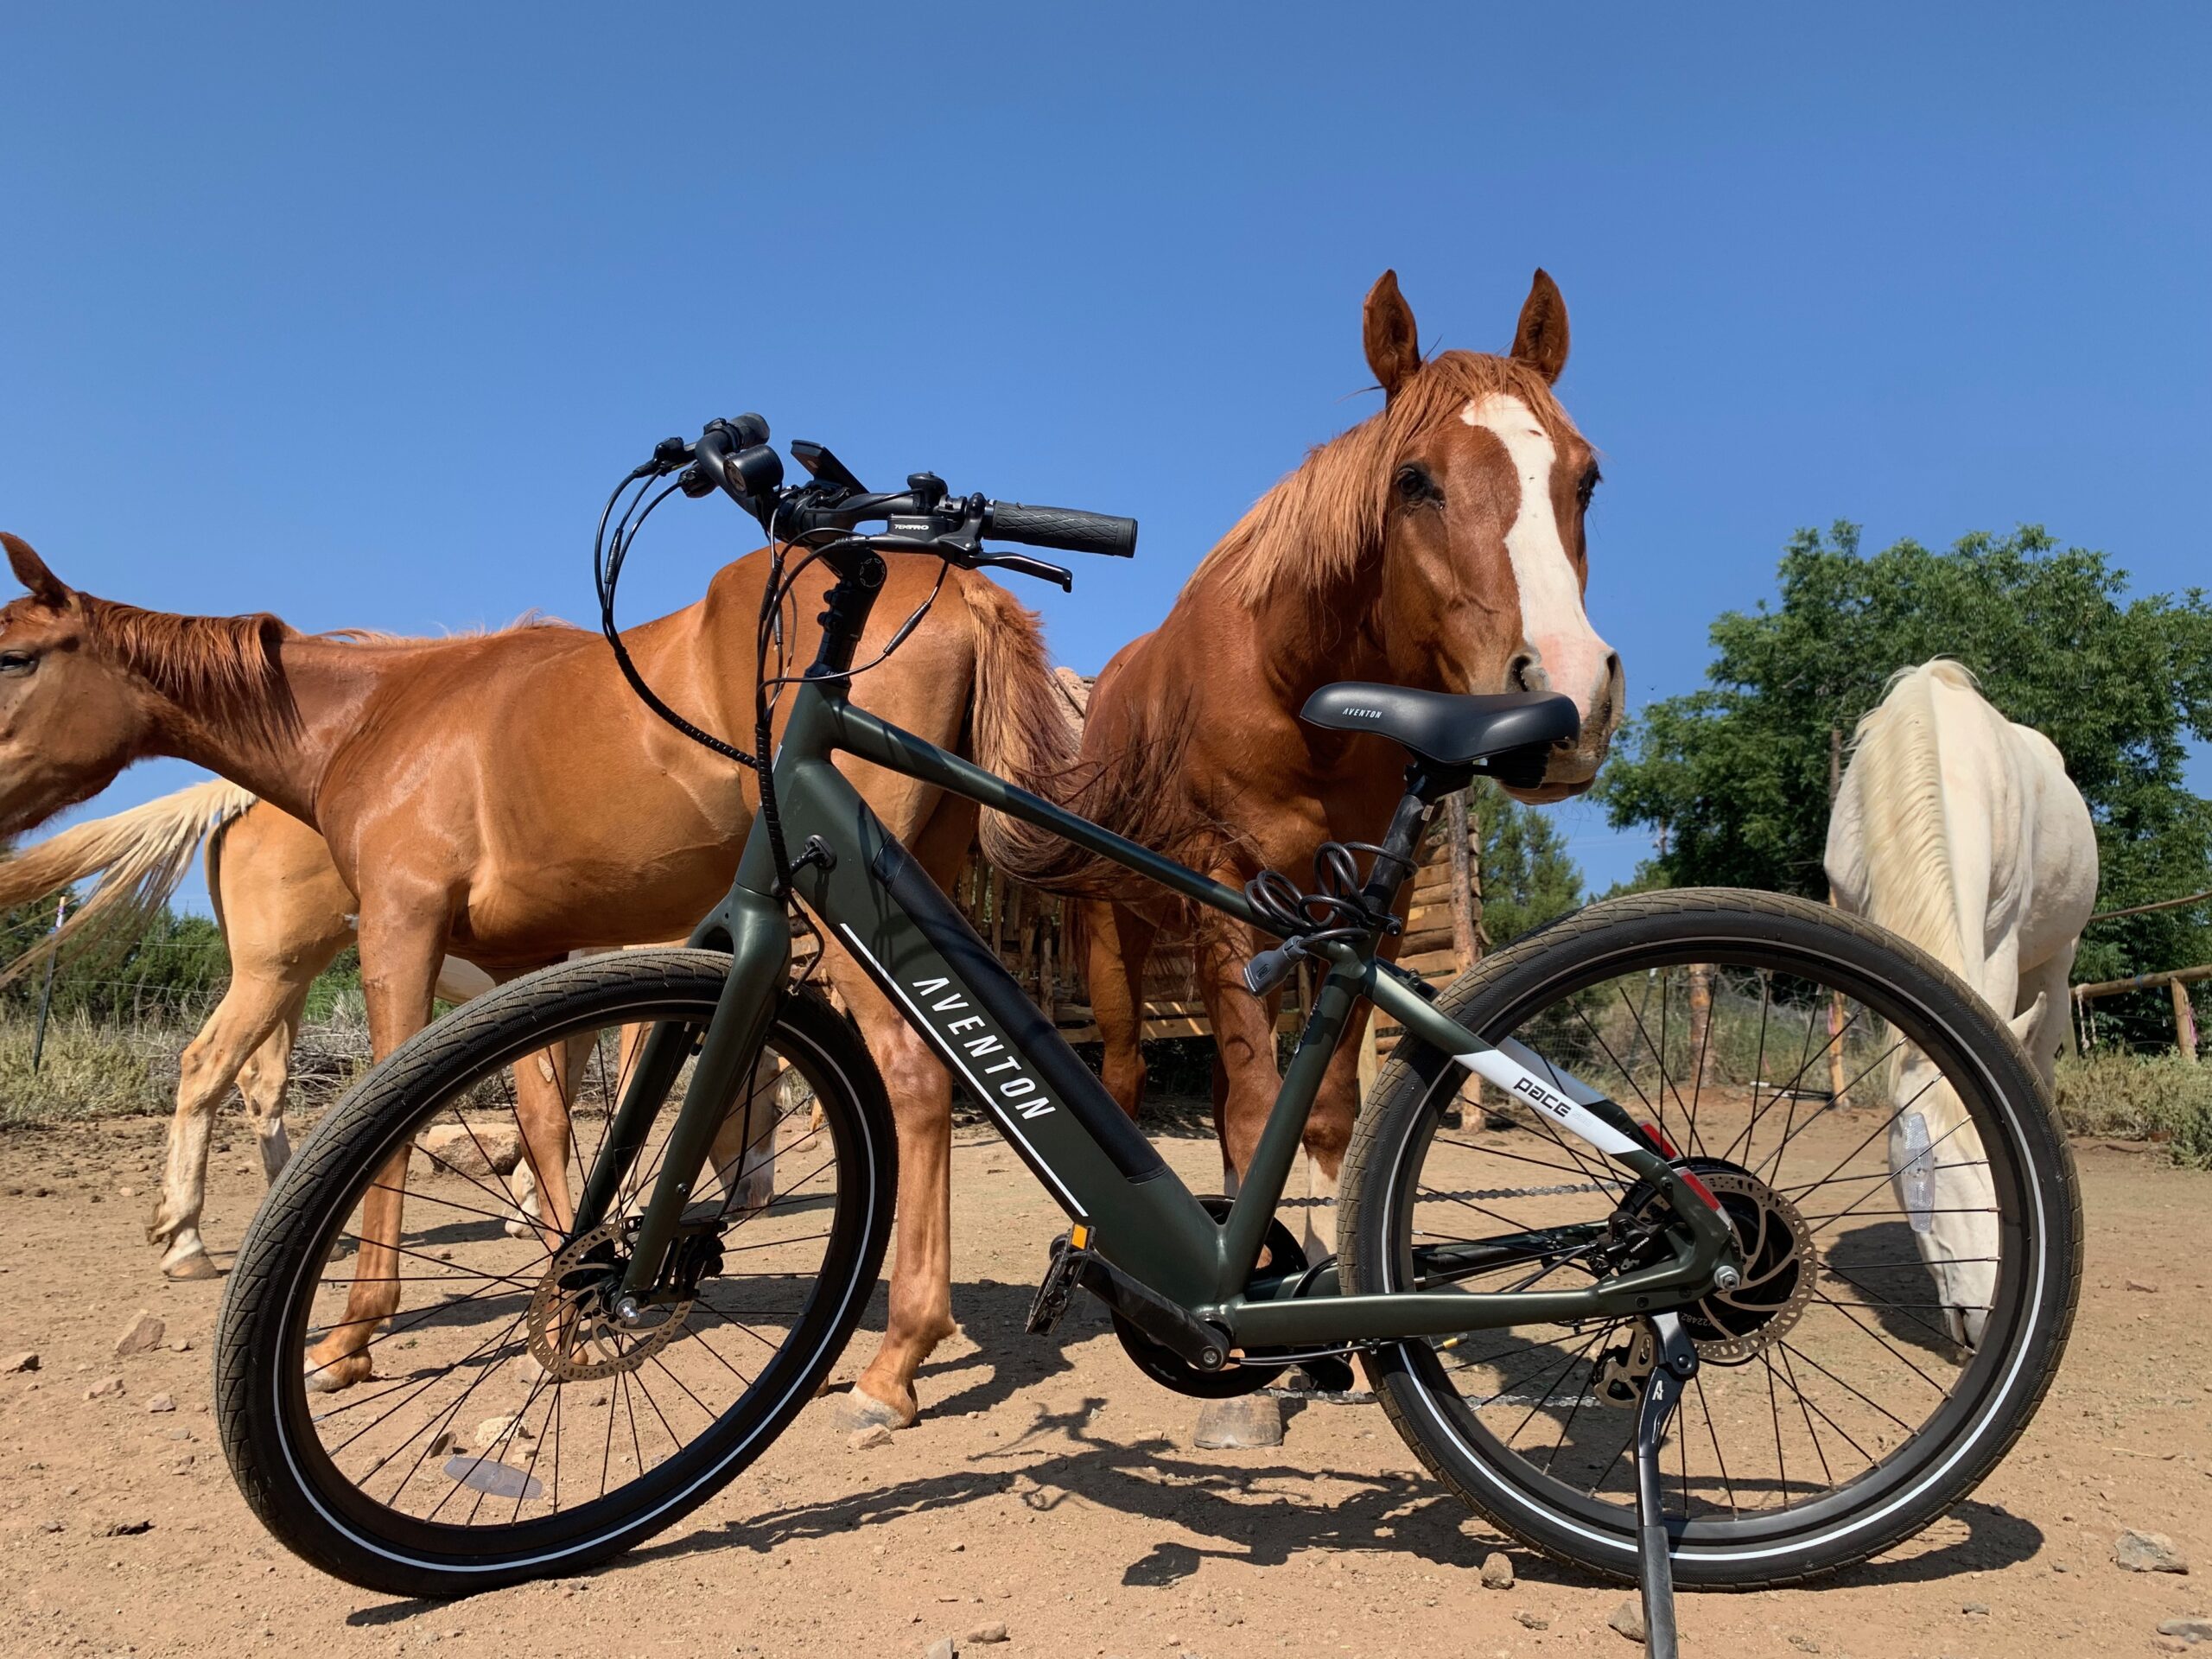 Aventon Pace 500.3 E-Bike: A Sweet Electric Cruiser For Town